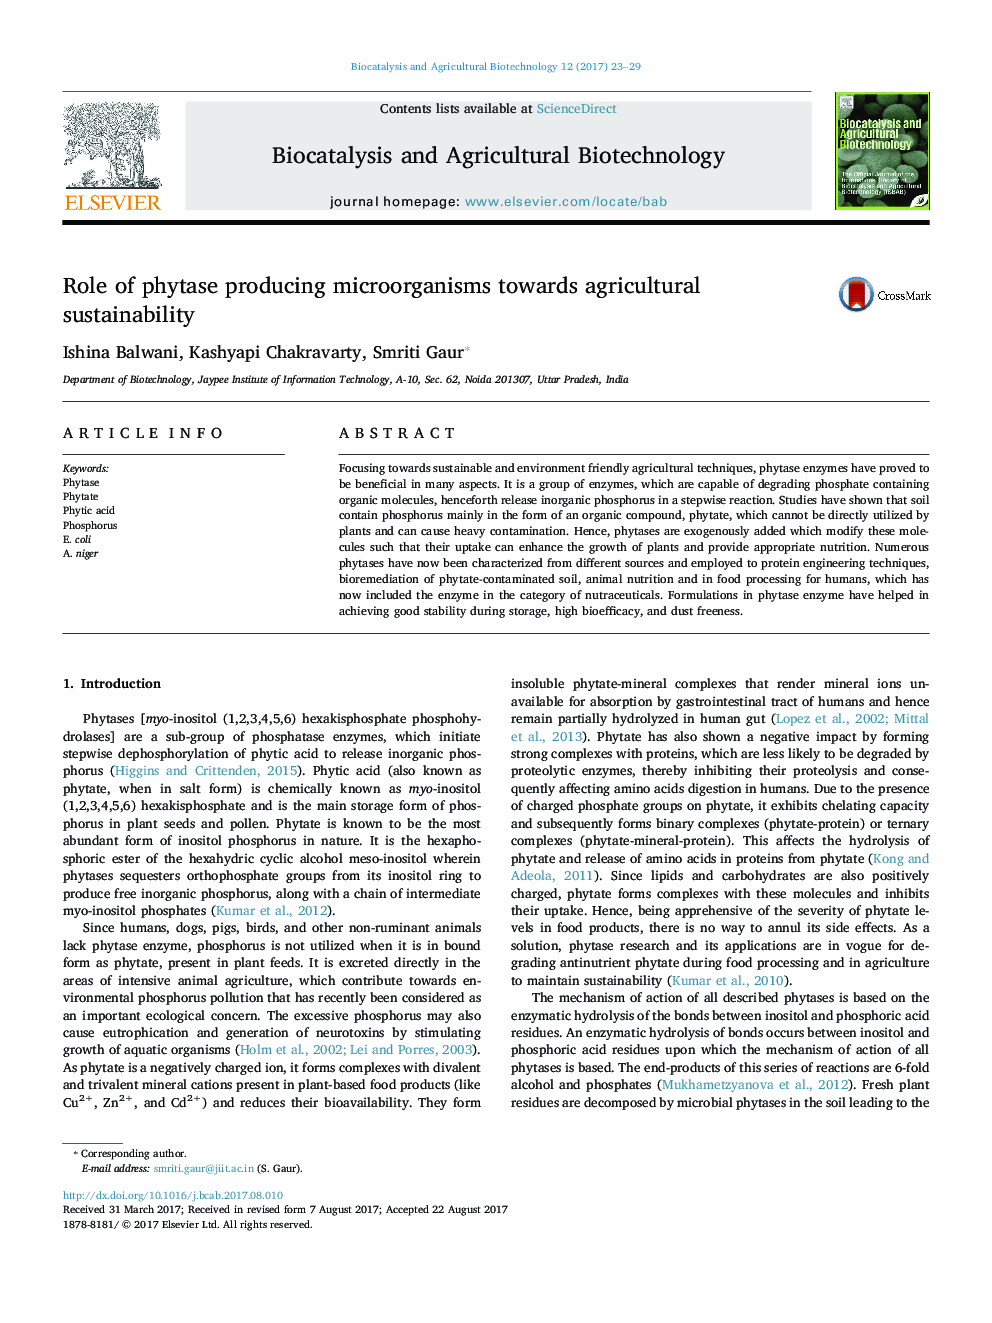 Role of phytase producing microorganisms towards agricultural sustainability